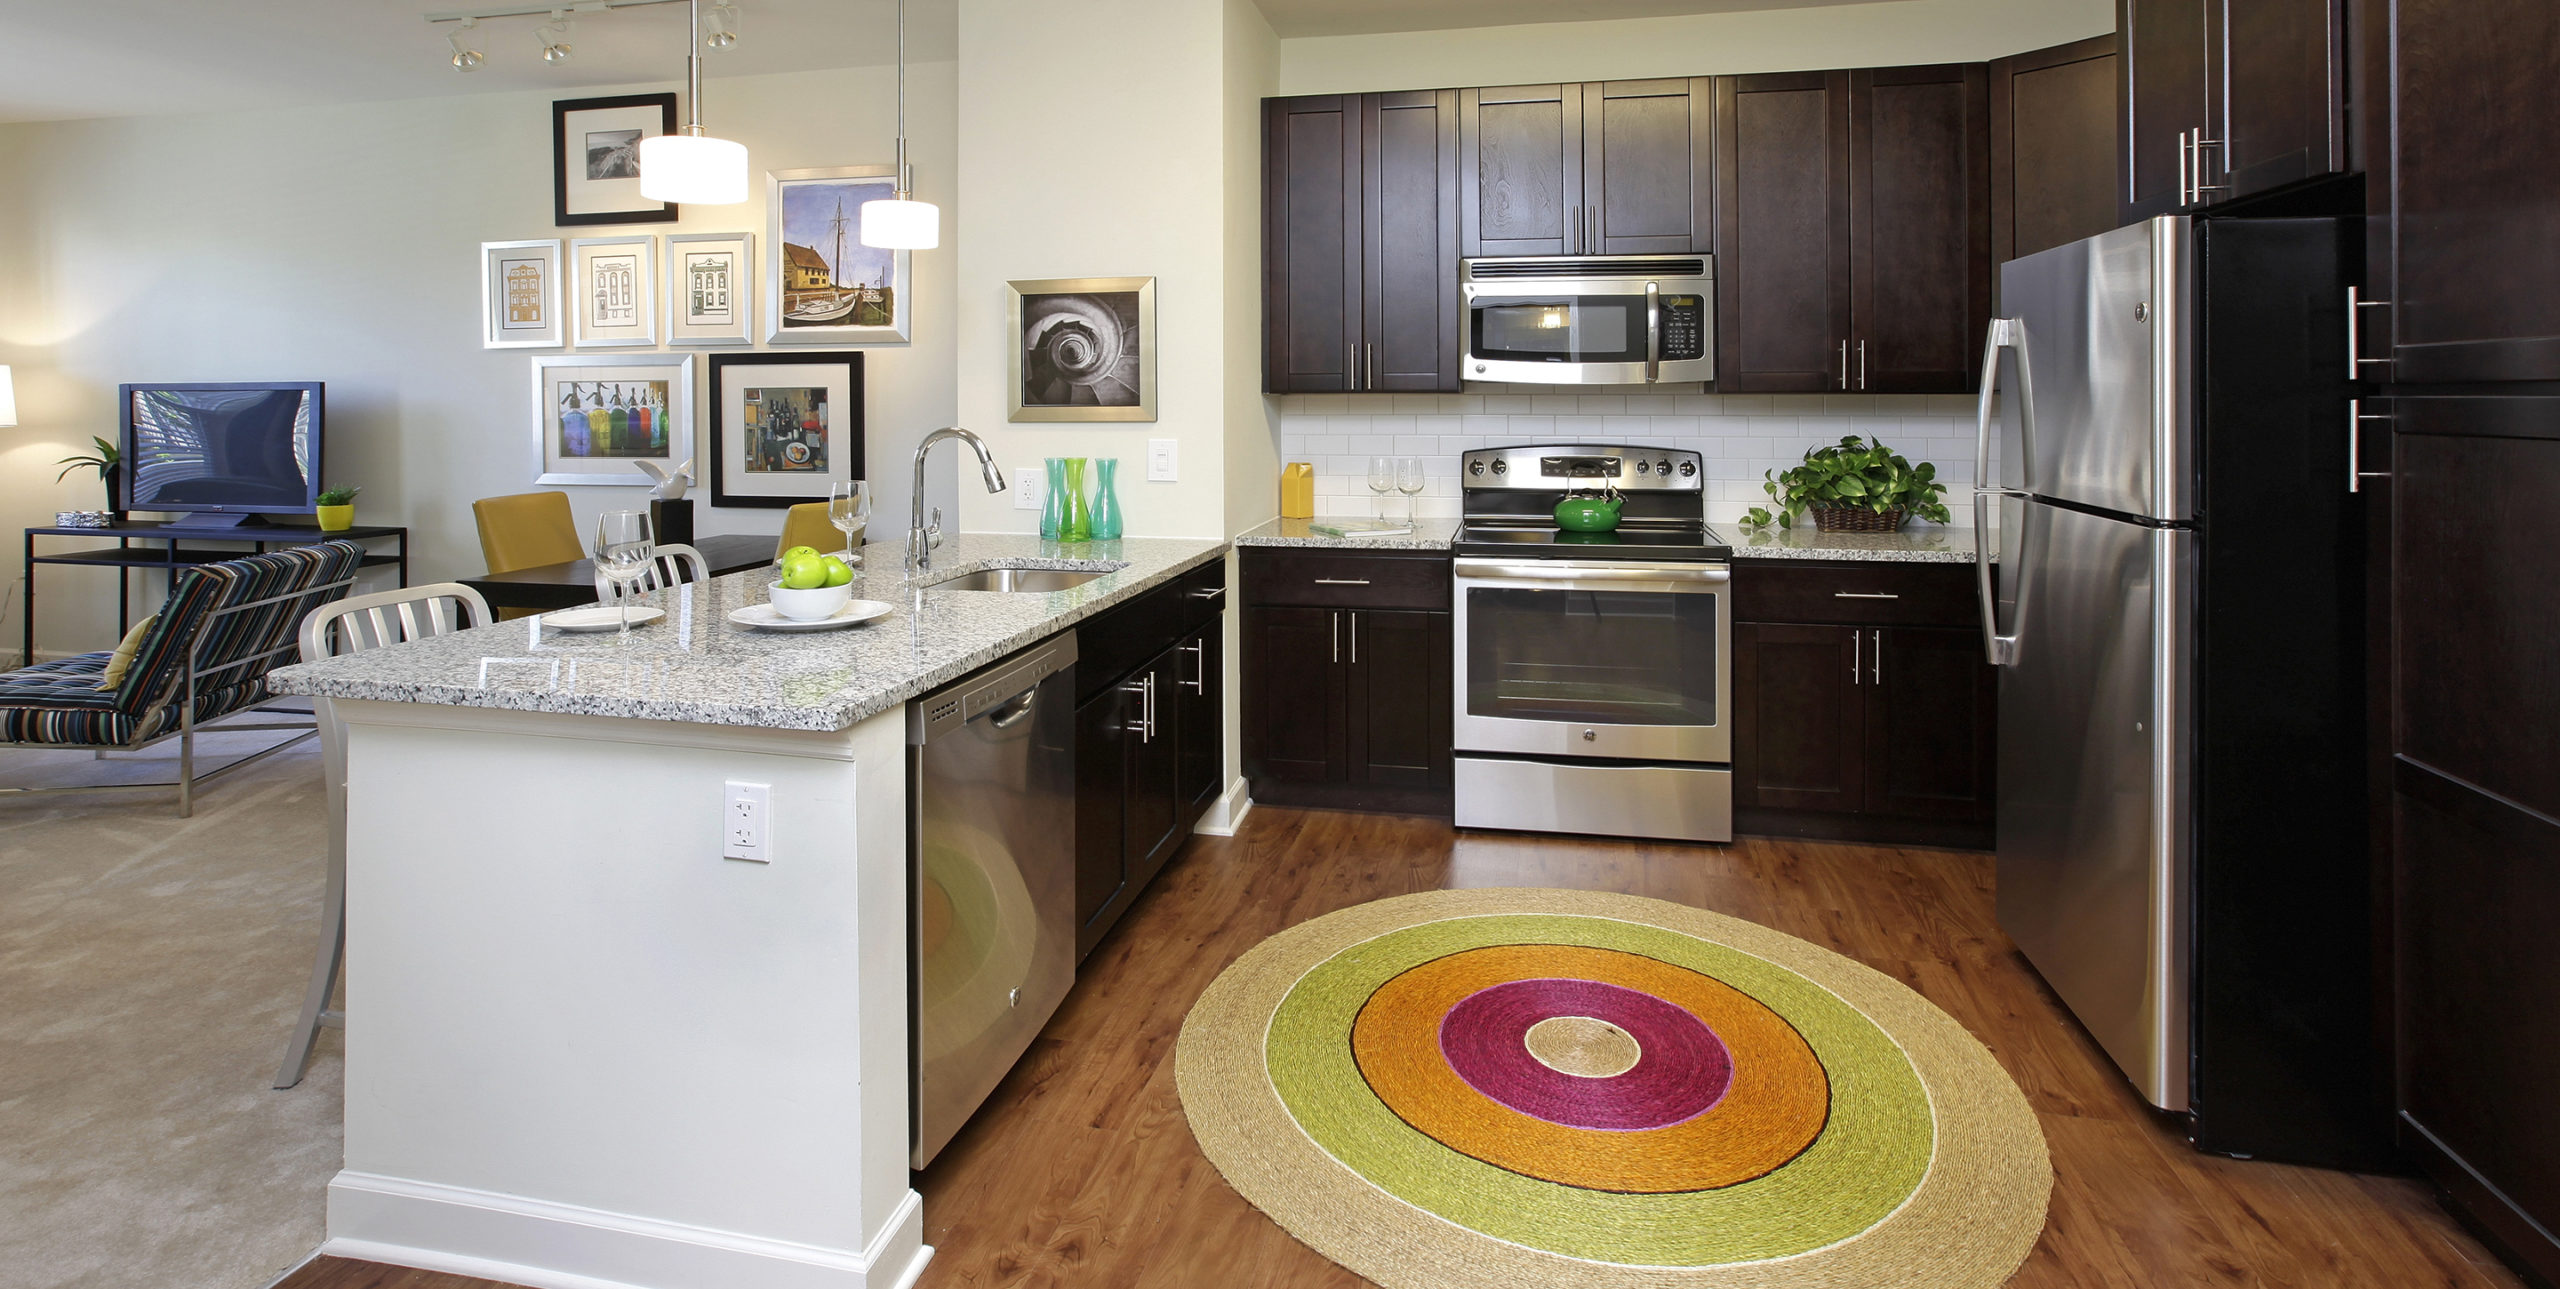 Kitchen in New Village at Patchogue apartments